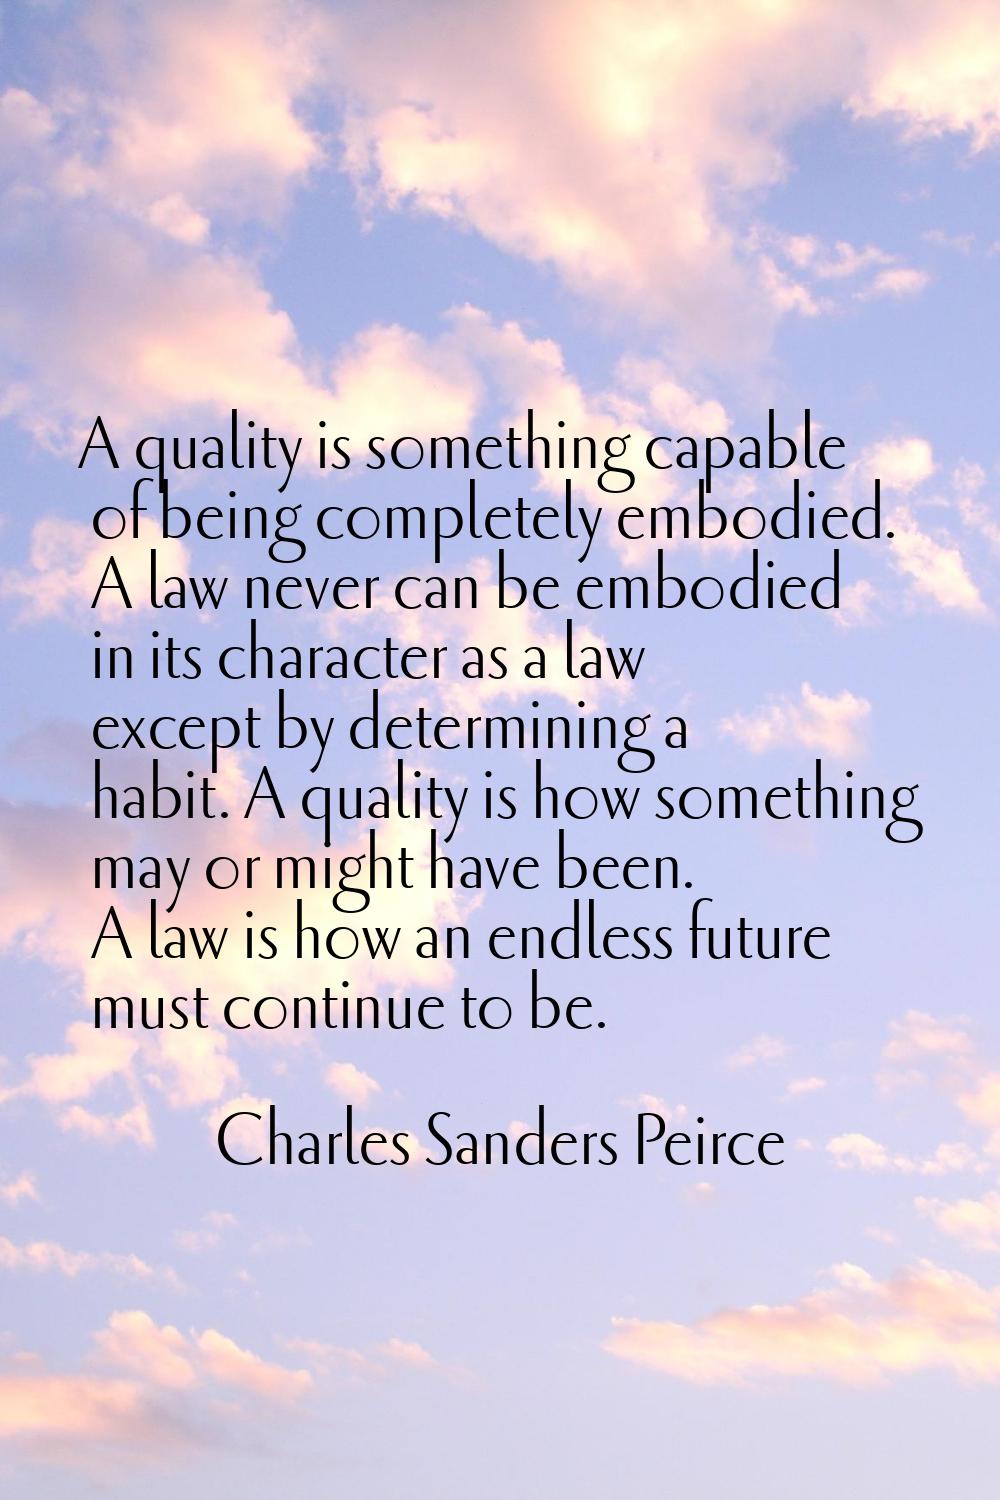 A quality is something capable of being completely embodied. A law never can be embodied in its cha